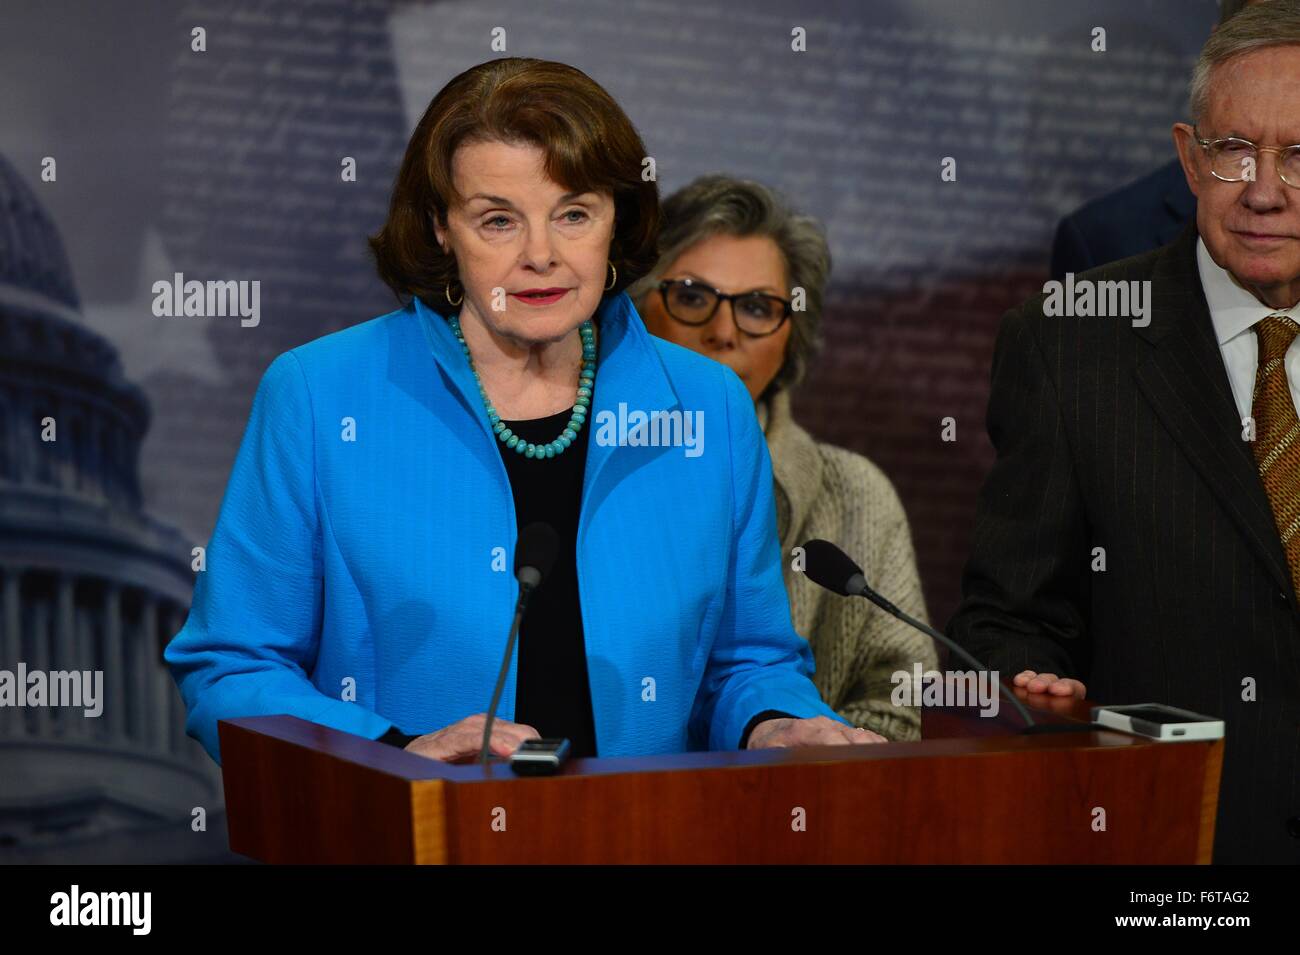 Washington DC, USA. 19th November, 2015. U.S. Senator Dianne Feinstein joined by other Democrats discusses their opposition to tighter restrictions on Syrian refugees coming to the U.S. during a press conference on Capitol Hill November 19, 2015 in Washington, DC.  Earlier the Republican controlled House passed a bill halting Syrian refugees until they undergo a more stringent vetting process following the Paris attacks. Credit:  Planetpix/Alamy Live News Stock Photo